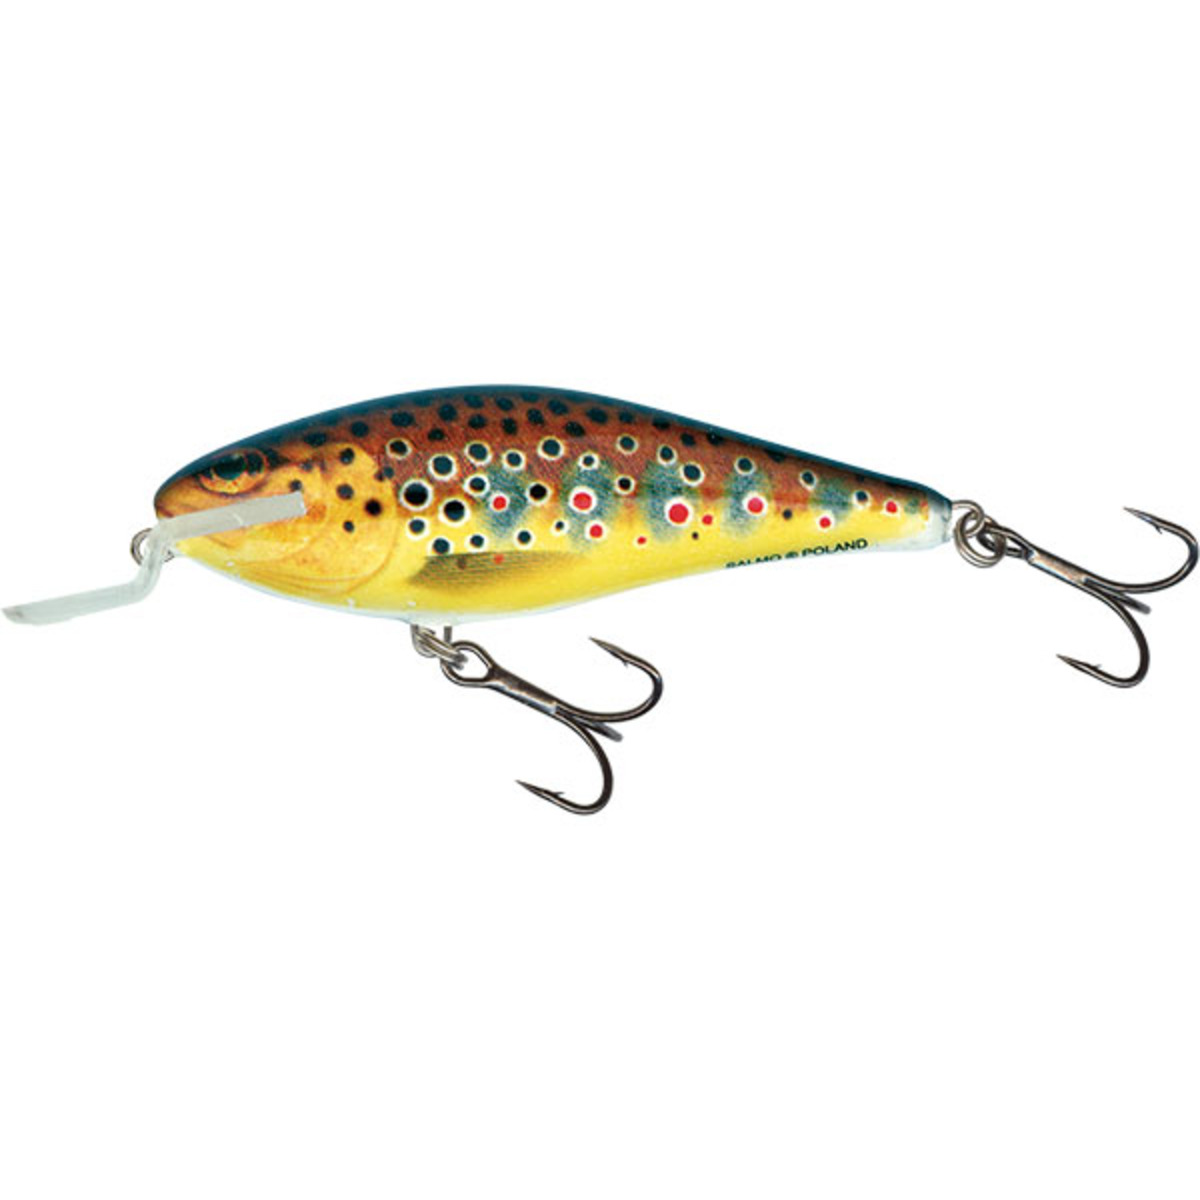 Salmo Executor Shallow Runner - 7 Cm - Trout